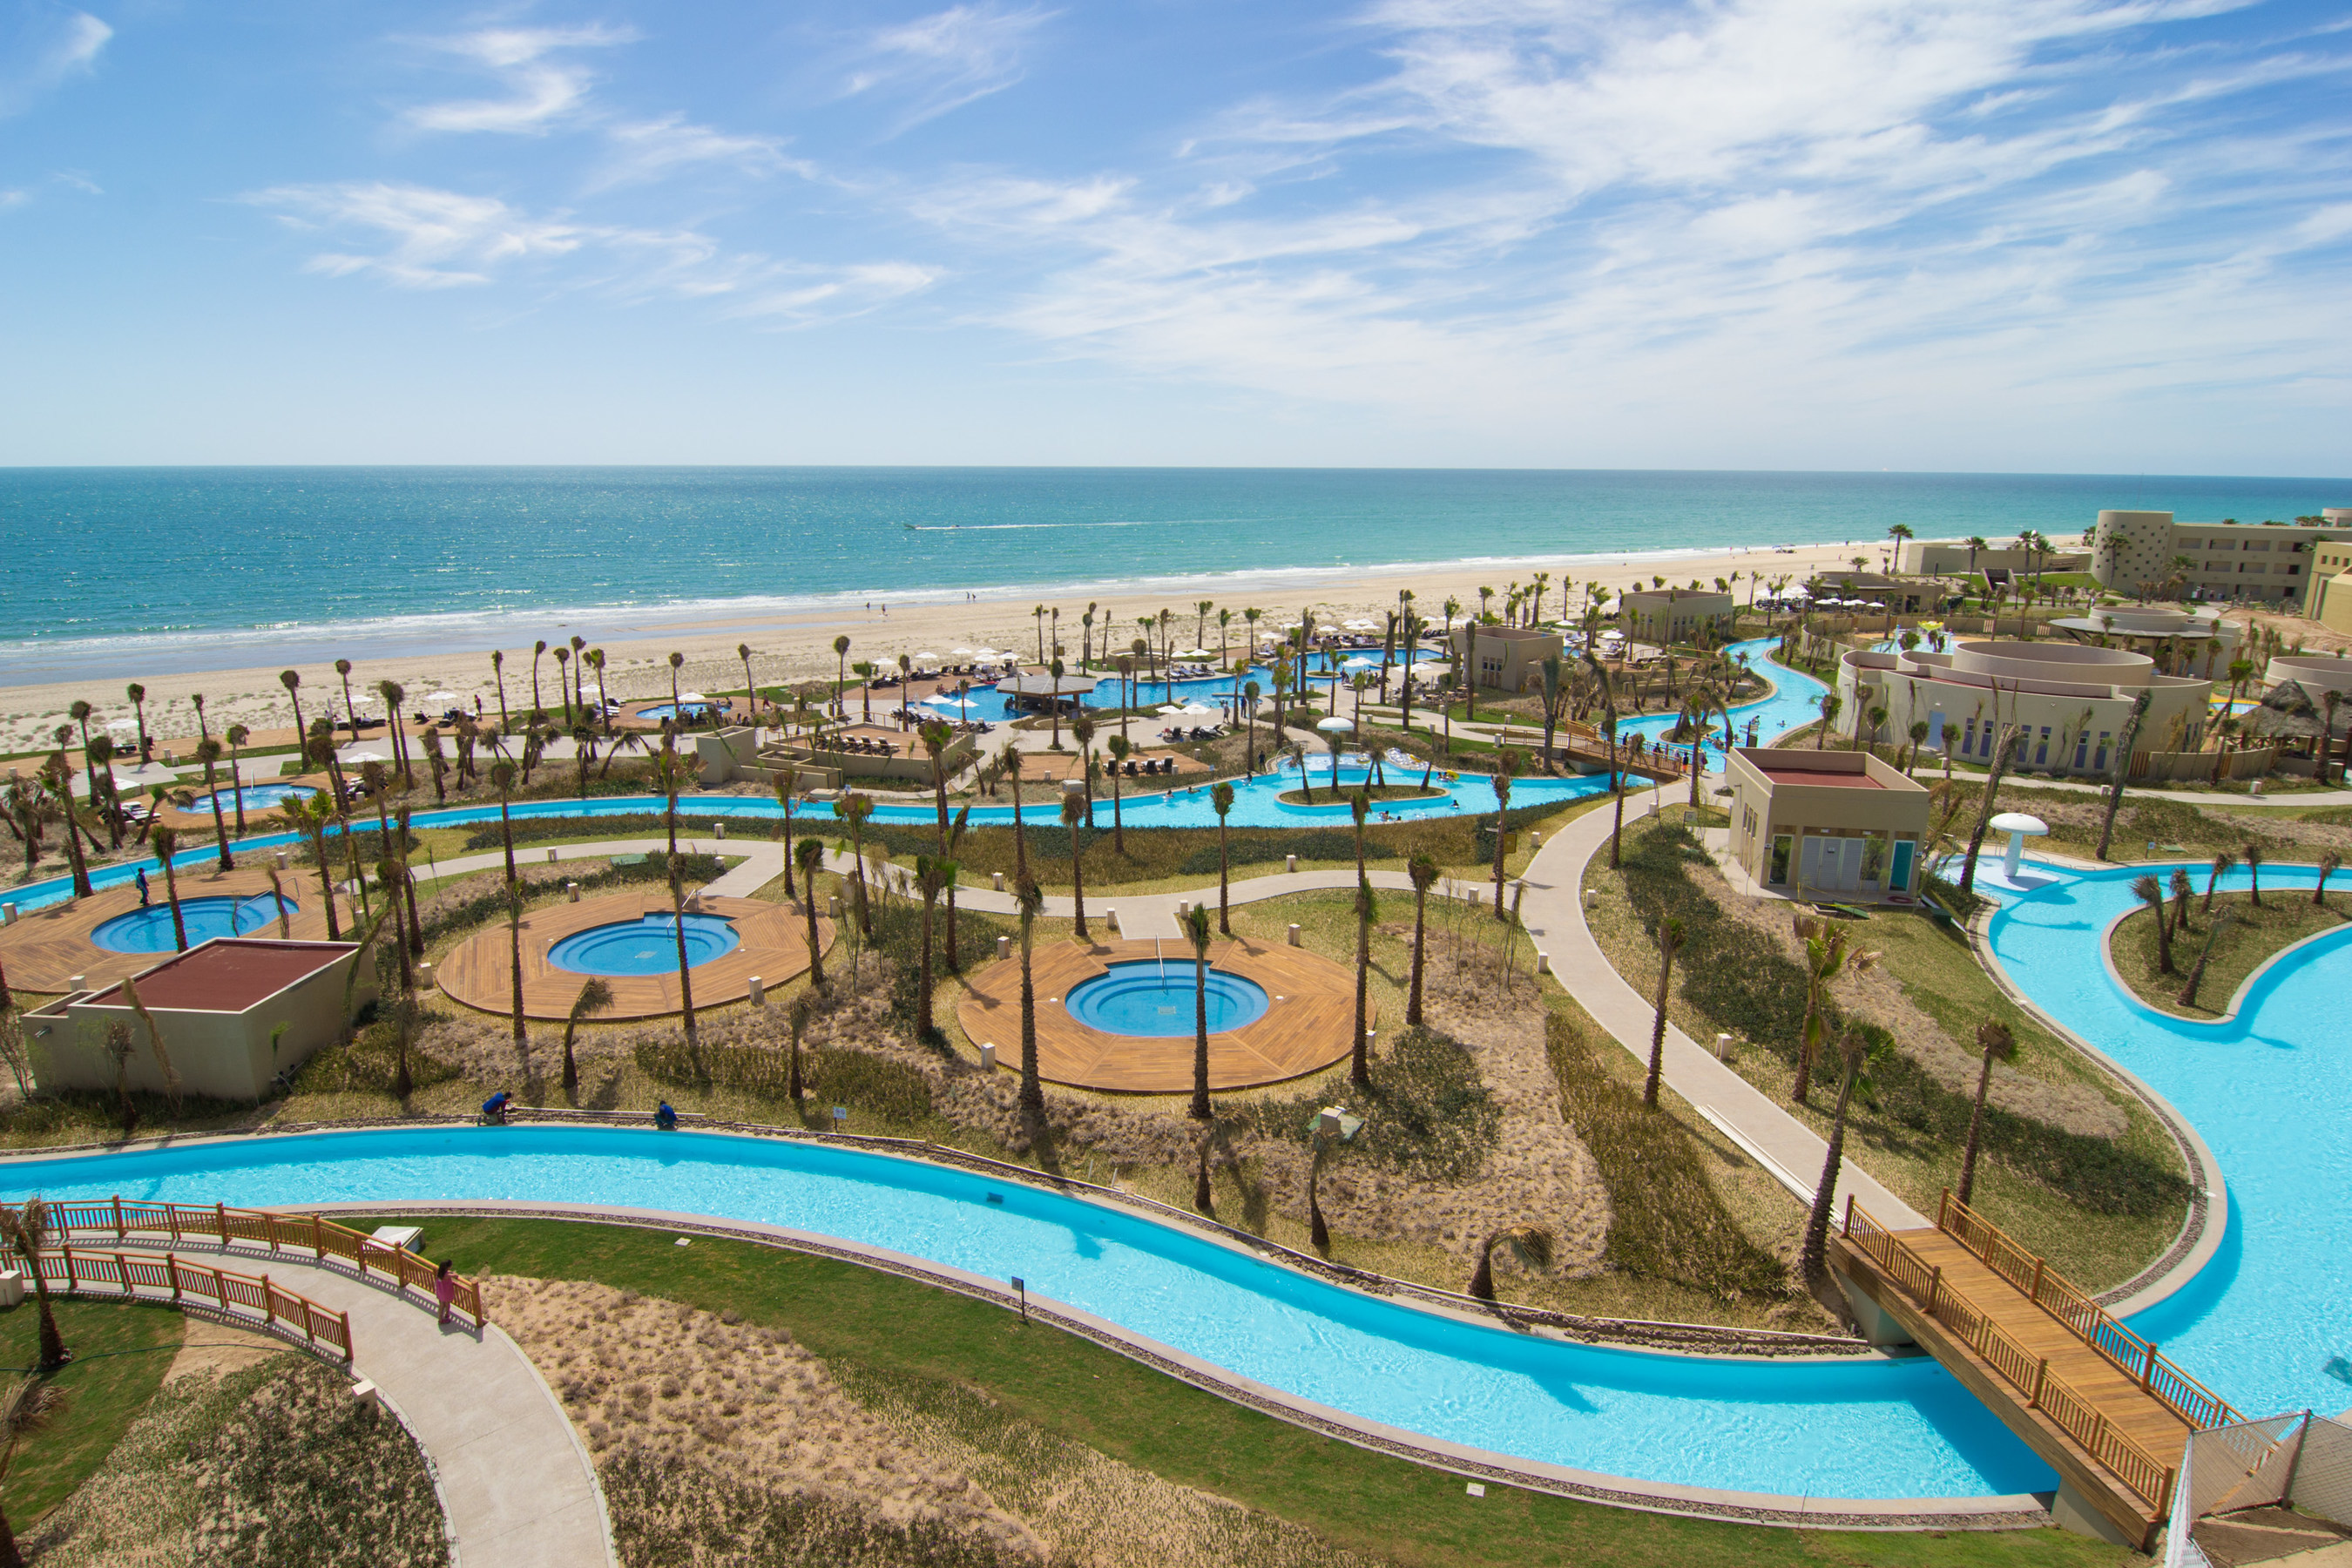 The Grand Mayan Puerto Penasco offers an elevated level of luxury to travelers.